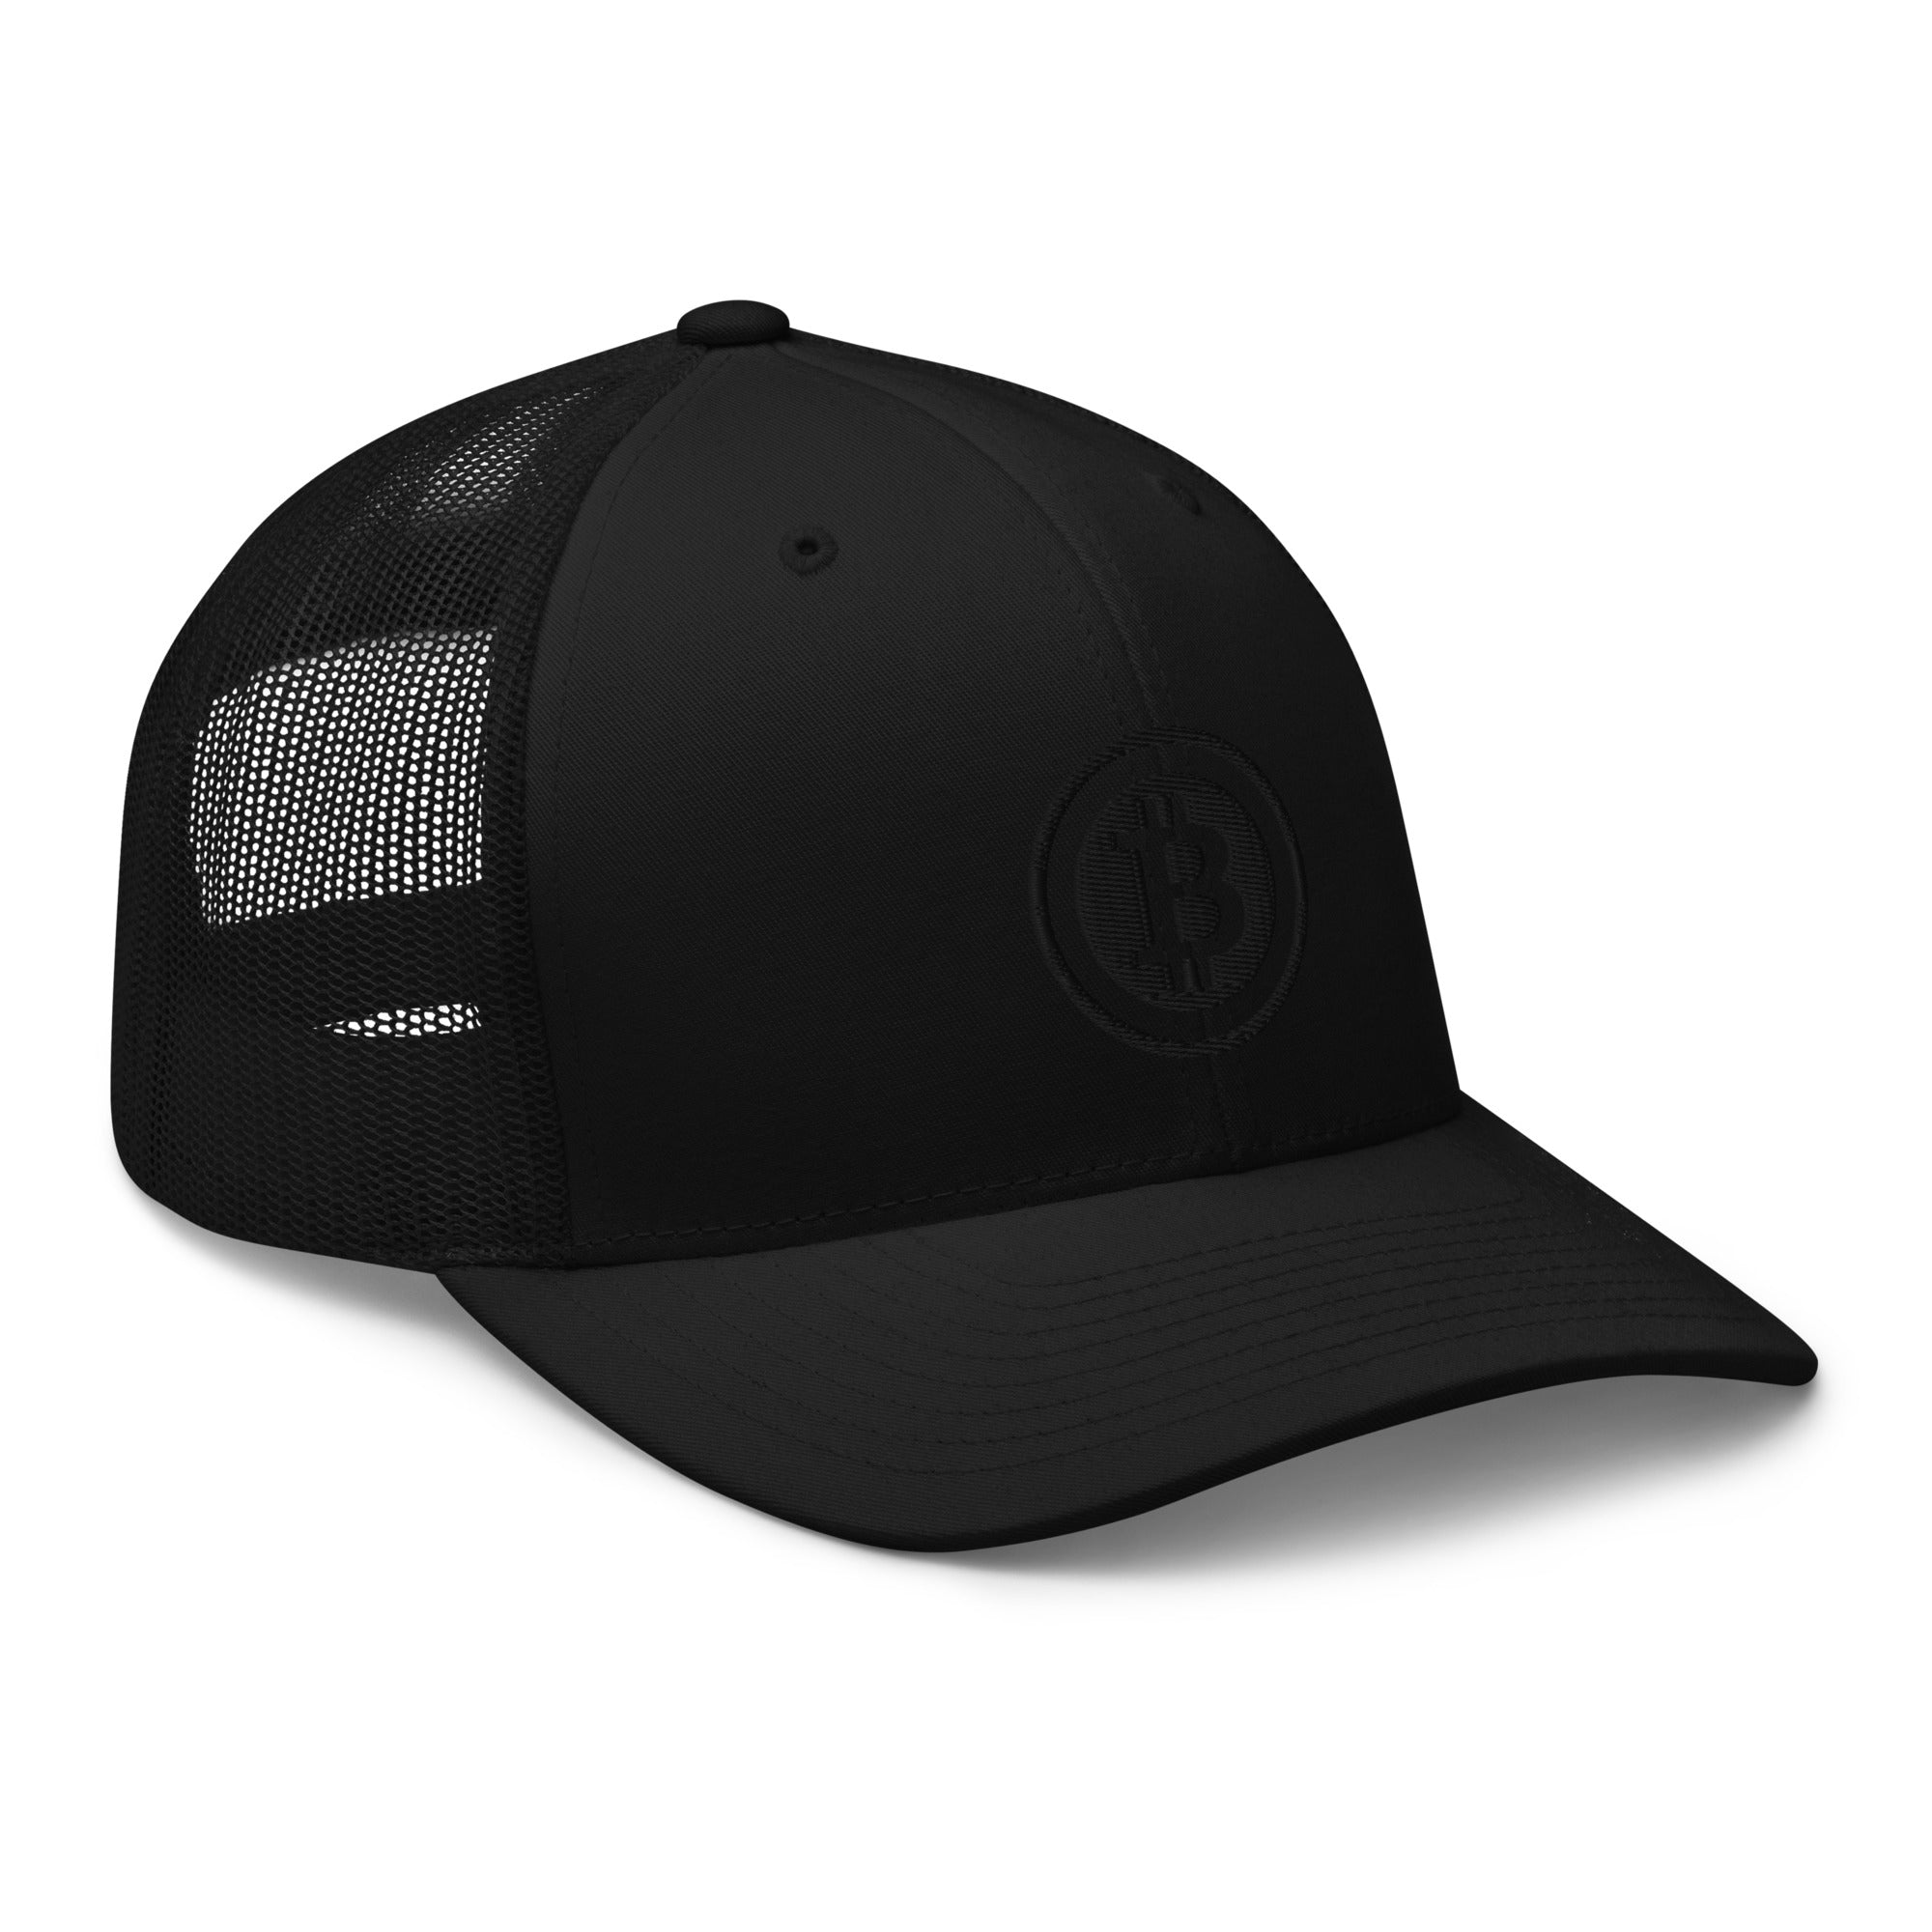 Black Bitcoin Crypto Currency Symbol Ticker Embroidered Trucker Cap Snapback Hat